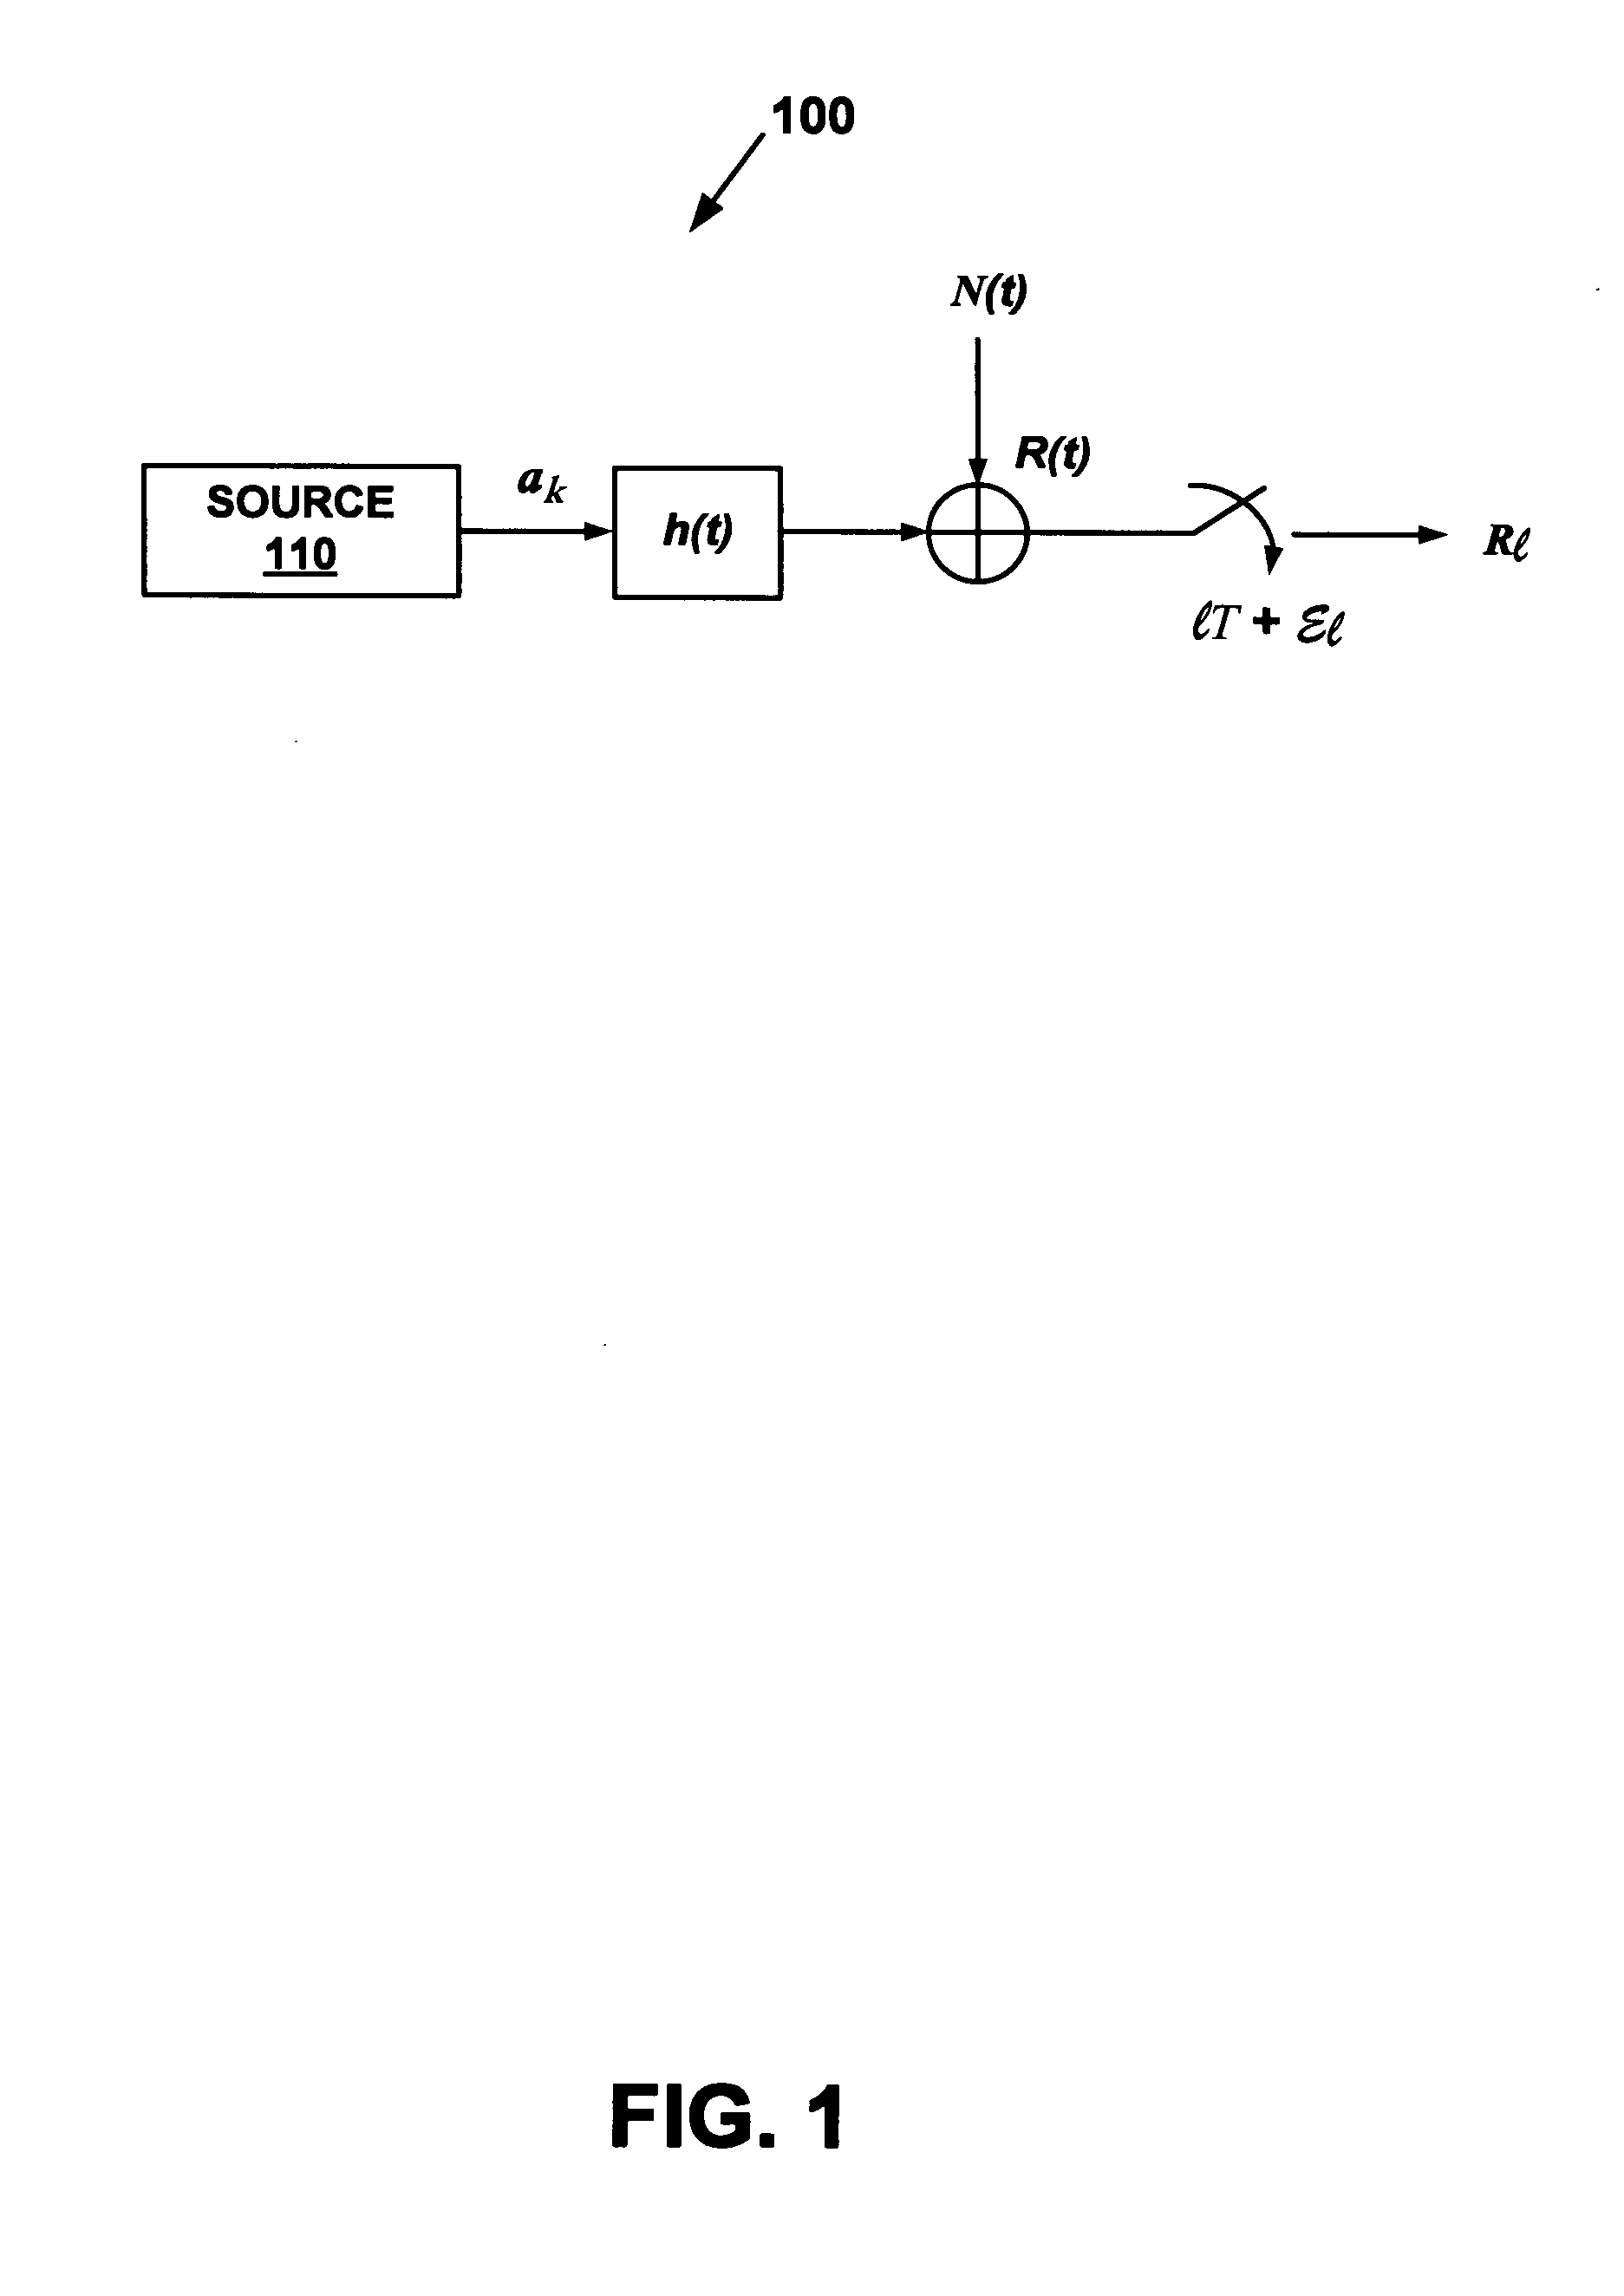 Handling synchronization errors potentially experienced by a storage device